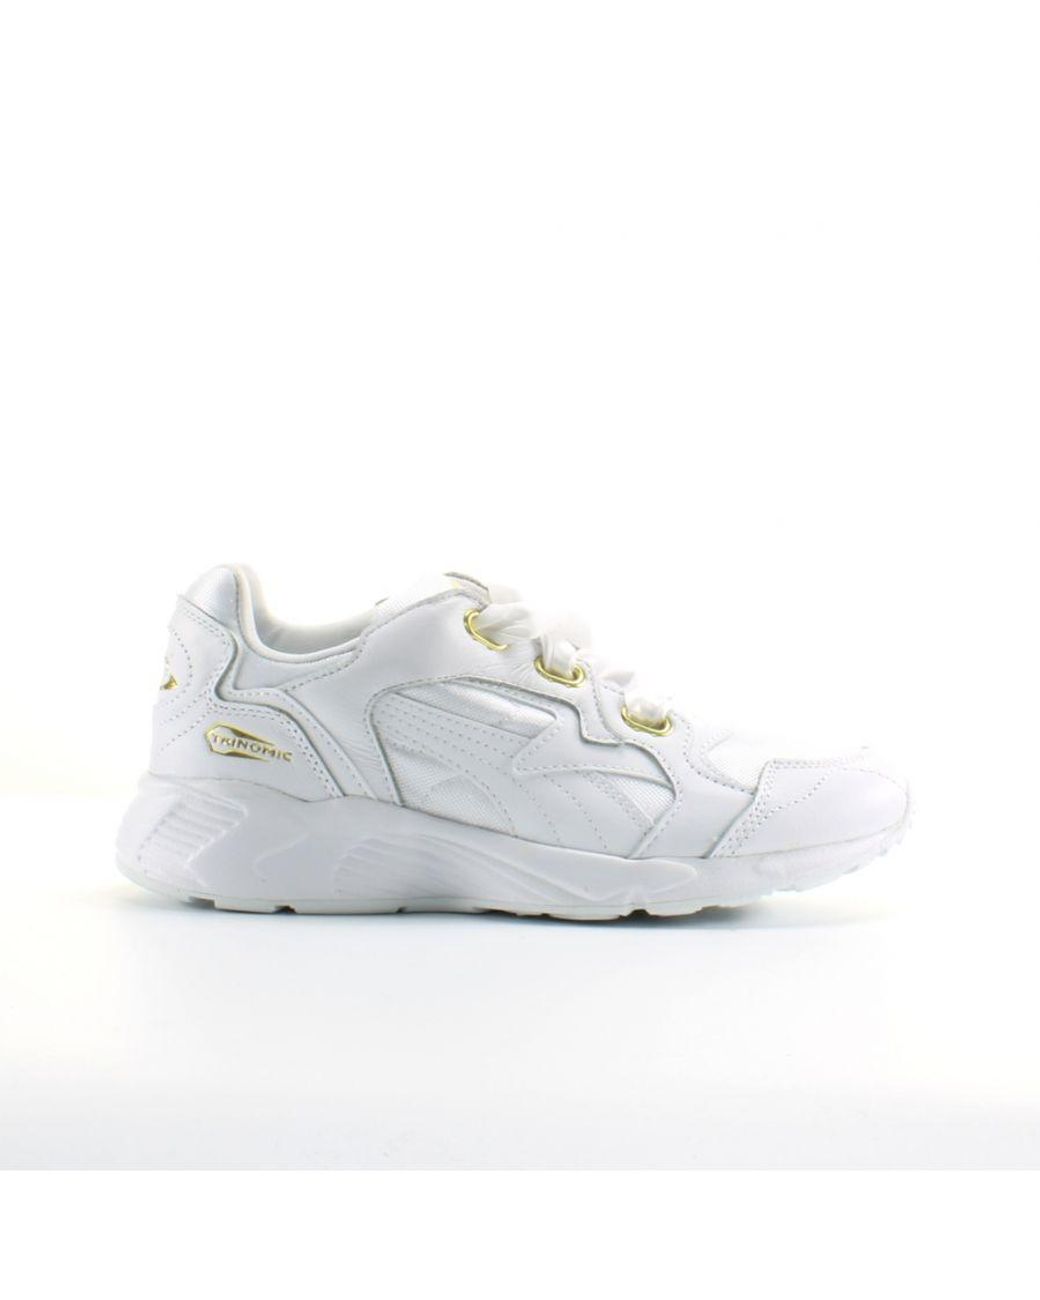 PUMA Prevail Heart White Synthetic Bow Lace Up Trainers 365649 02 | Lyst UK